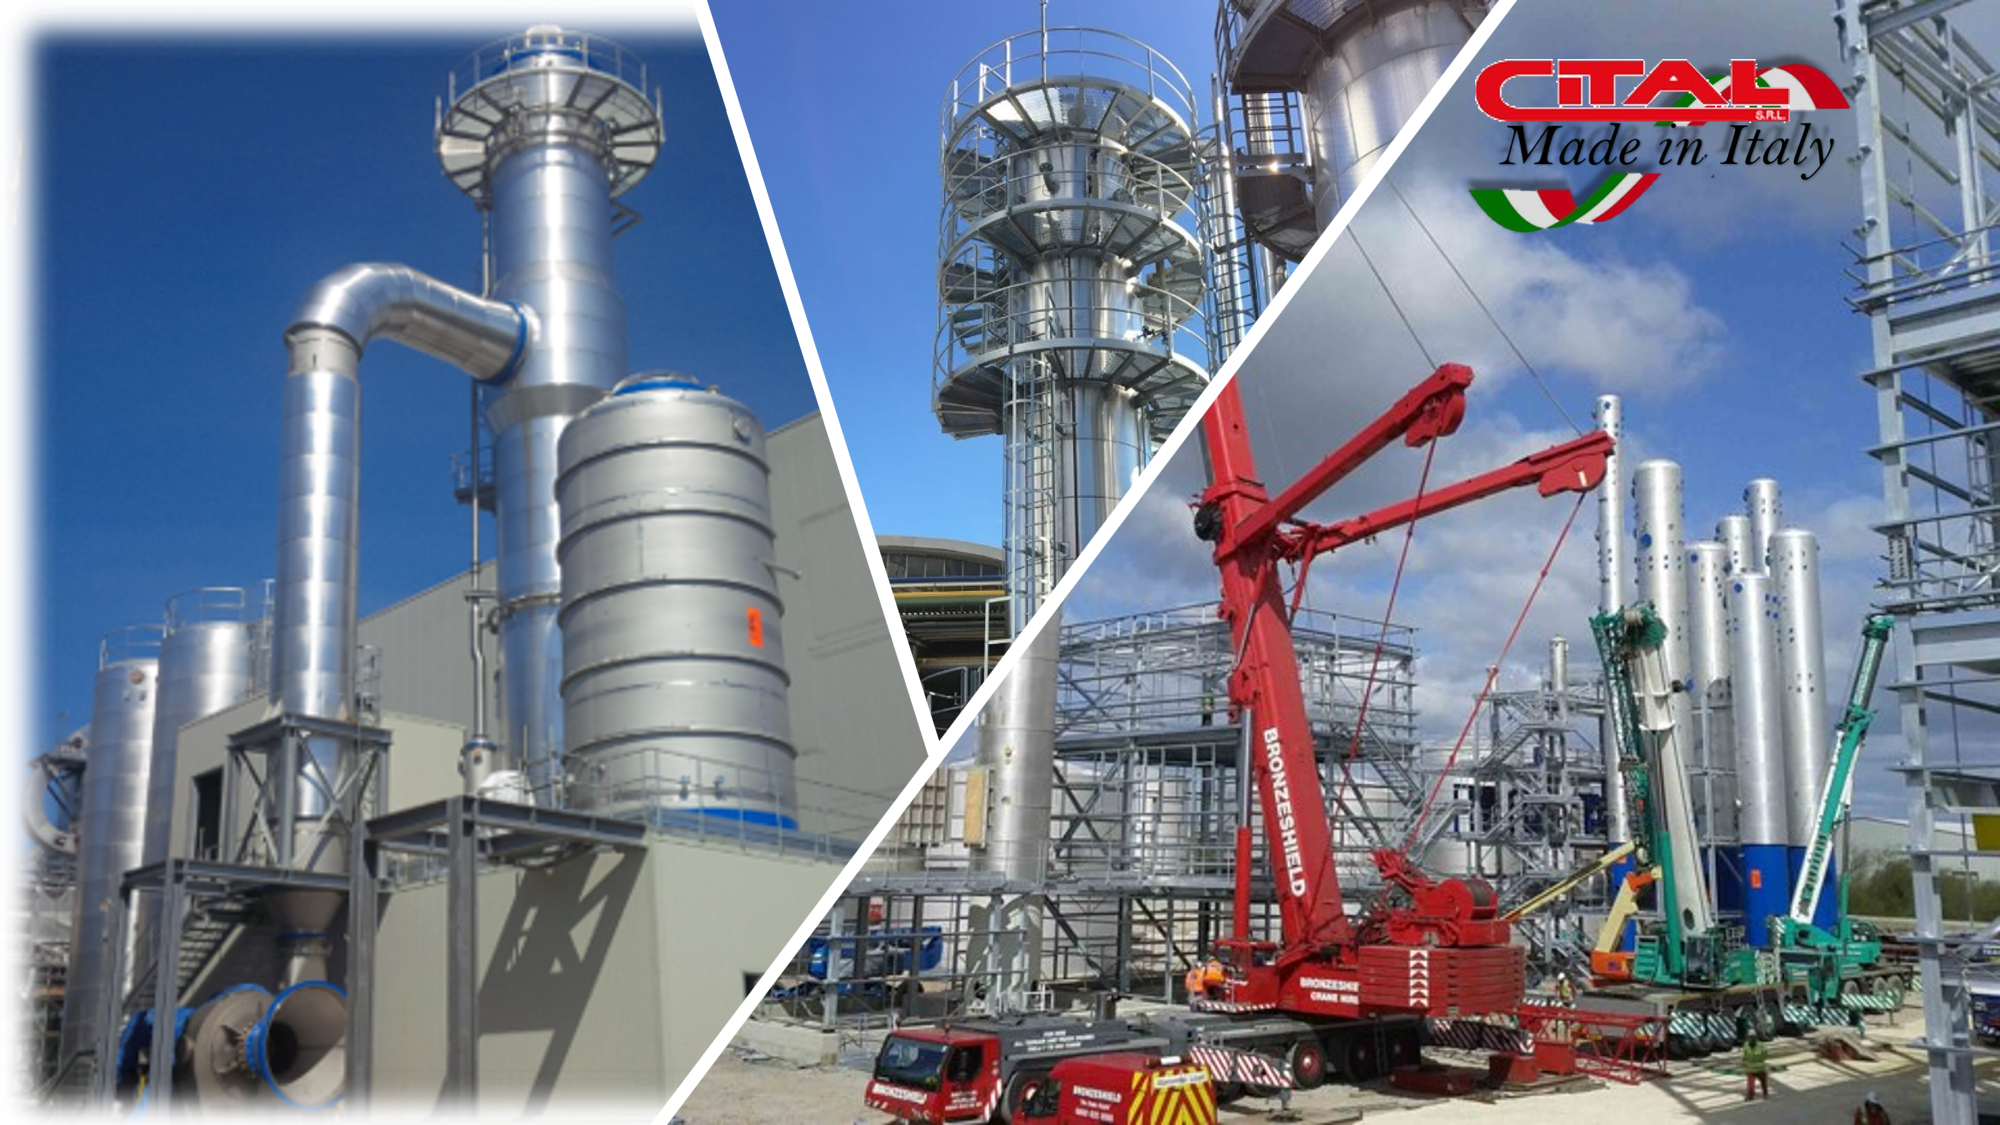 Pressure equipment, columns, tanks, reactors on site for many industries including water treatment.